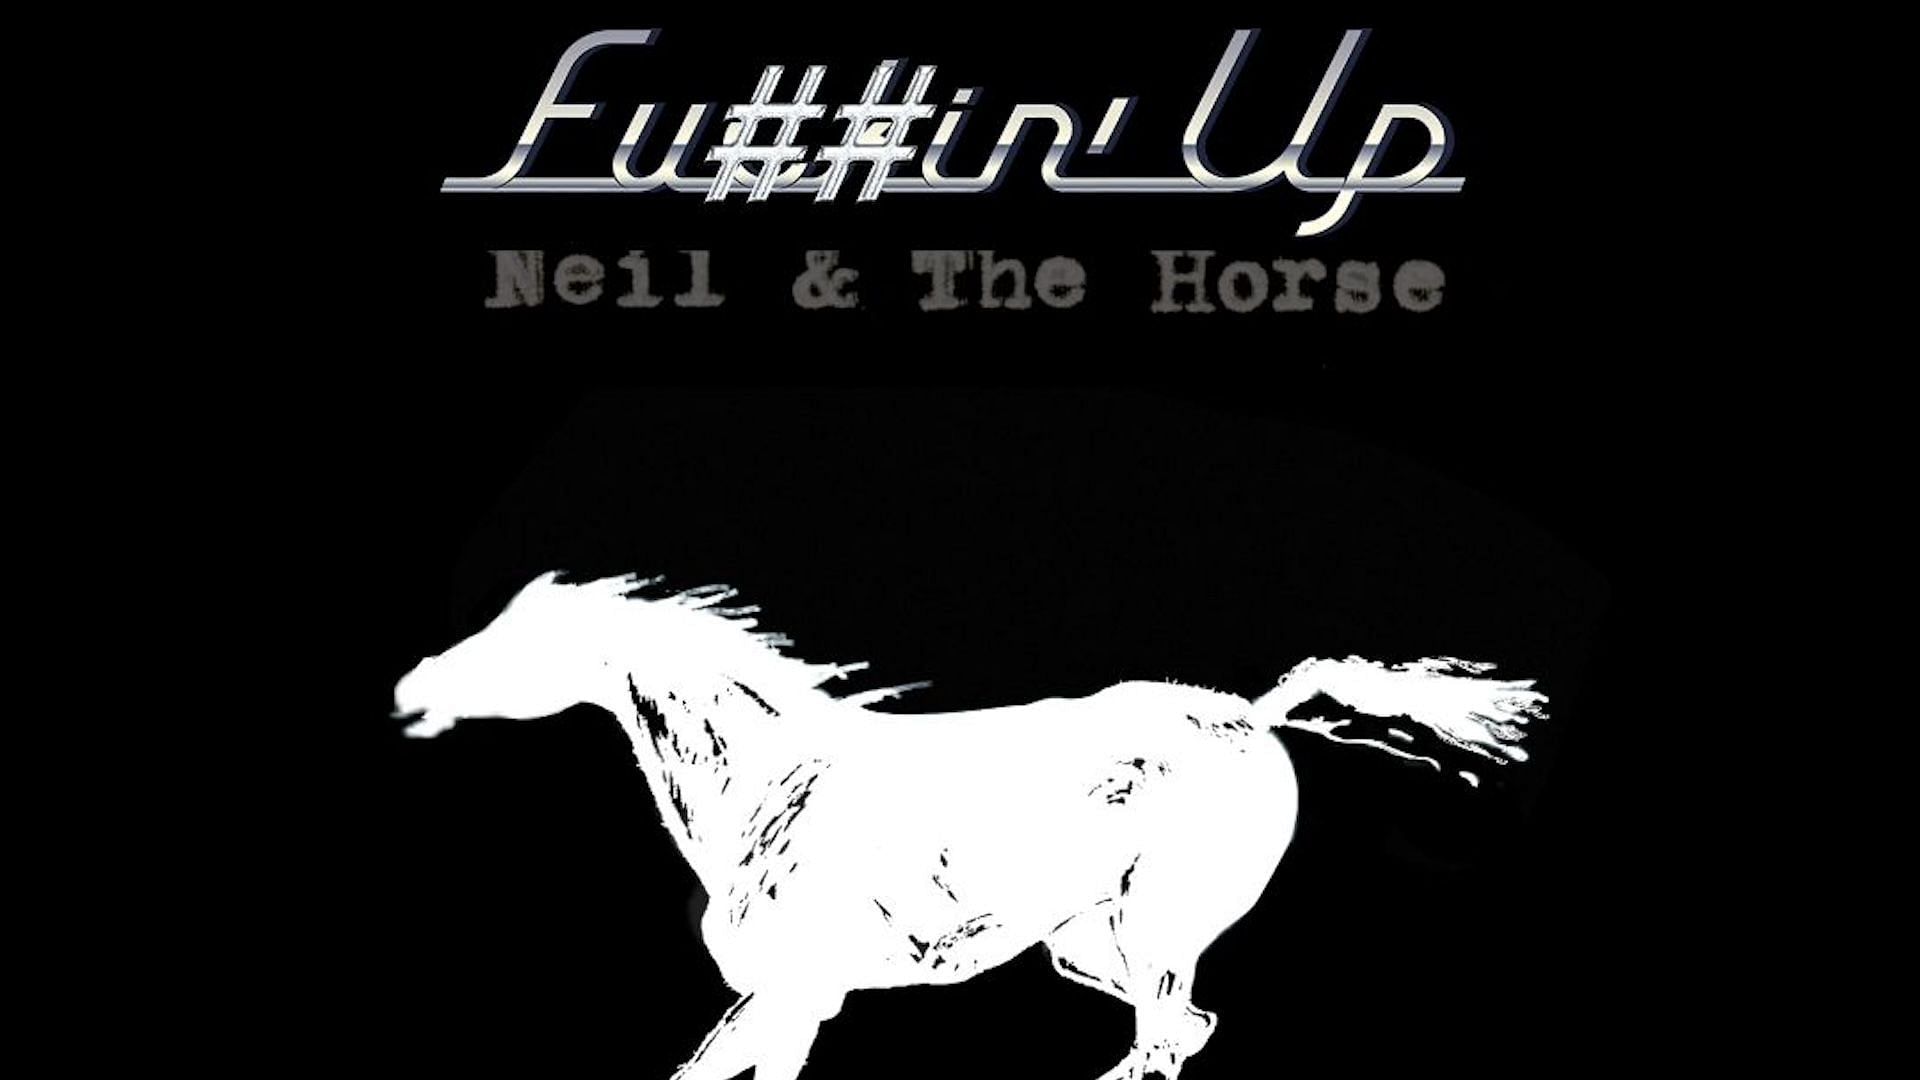 The official album cover for Neil Young &amp; Crazy Horse&#039;s new album &#039;Fu##in&rsquo; Up&#039; (Image via Instagram/@neilyoungarchives)